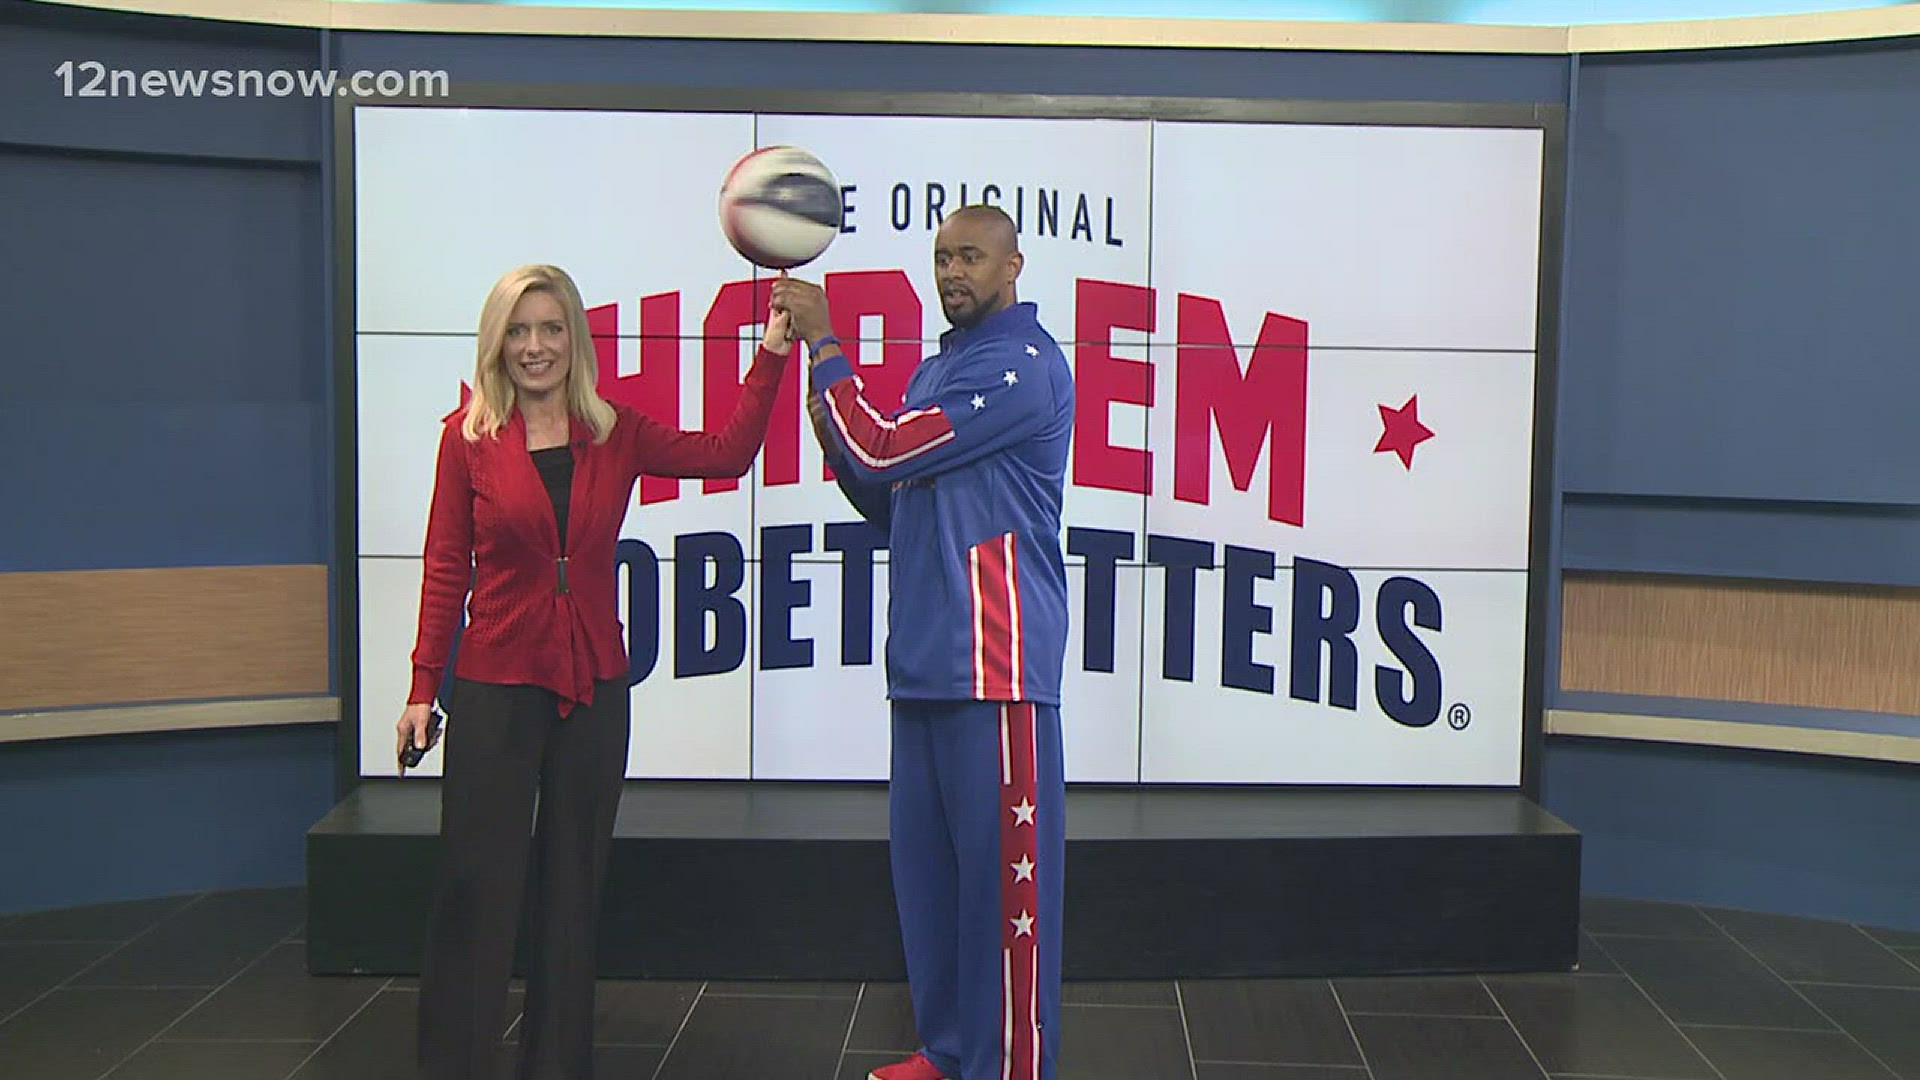 The Original Harlem Globetrotters will be at Ford Park Arena this Sunday, January 28.